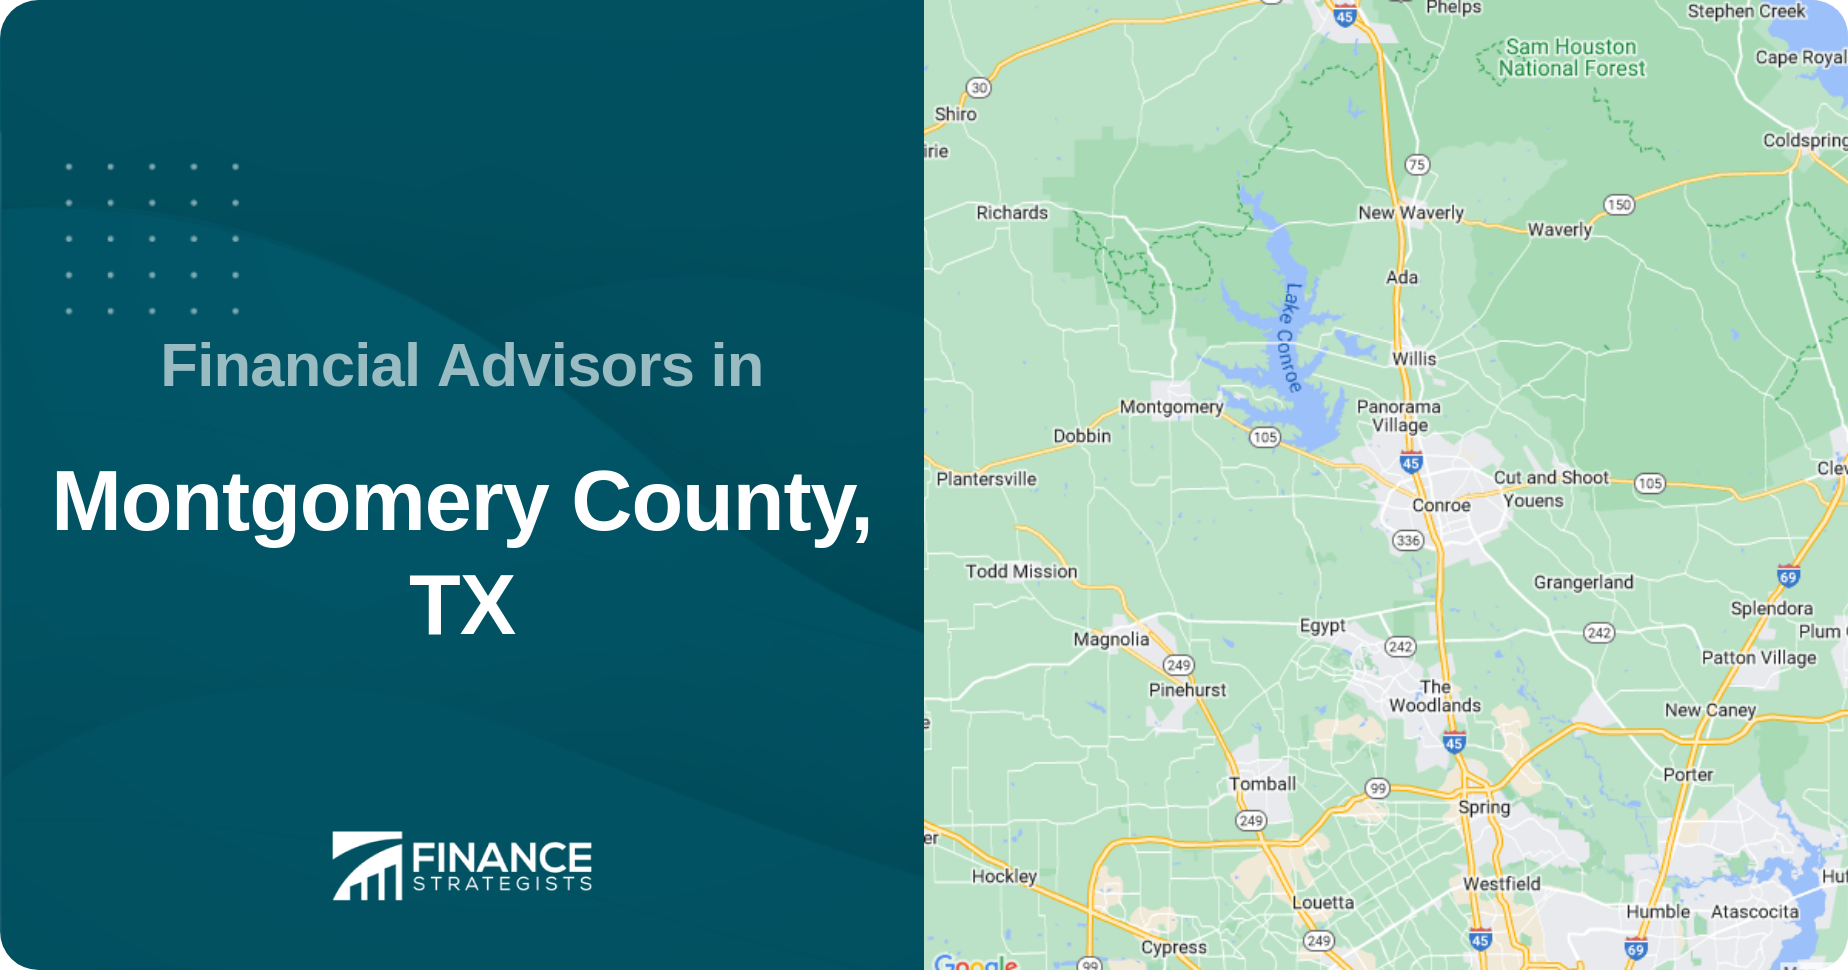 Financial Advisors in Montgomery County, TX